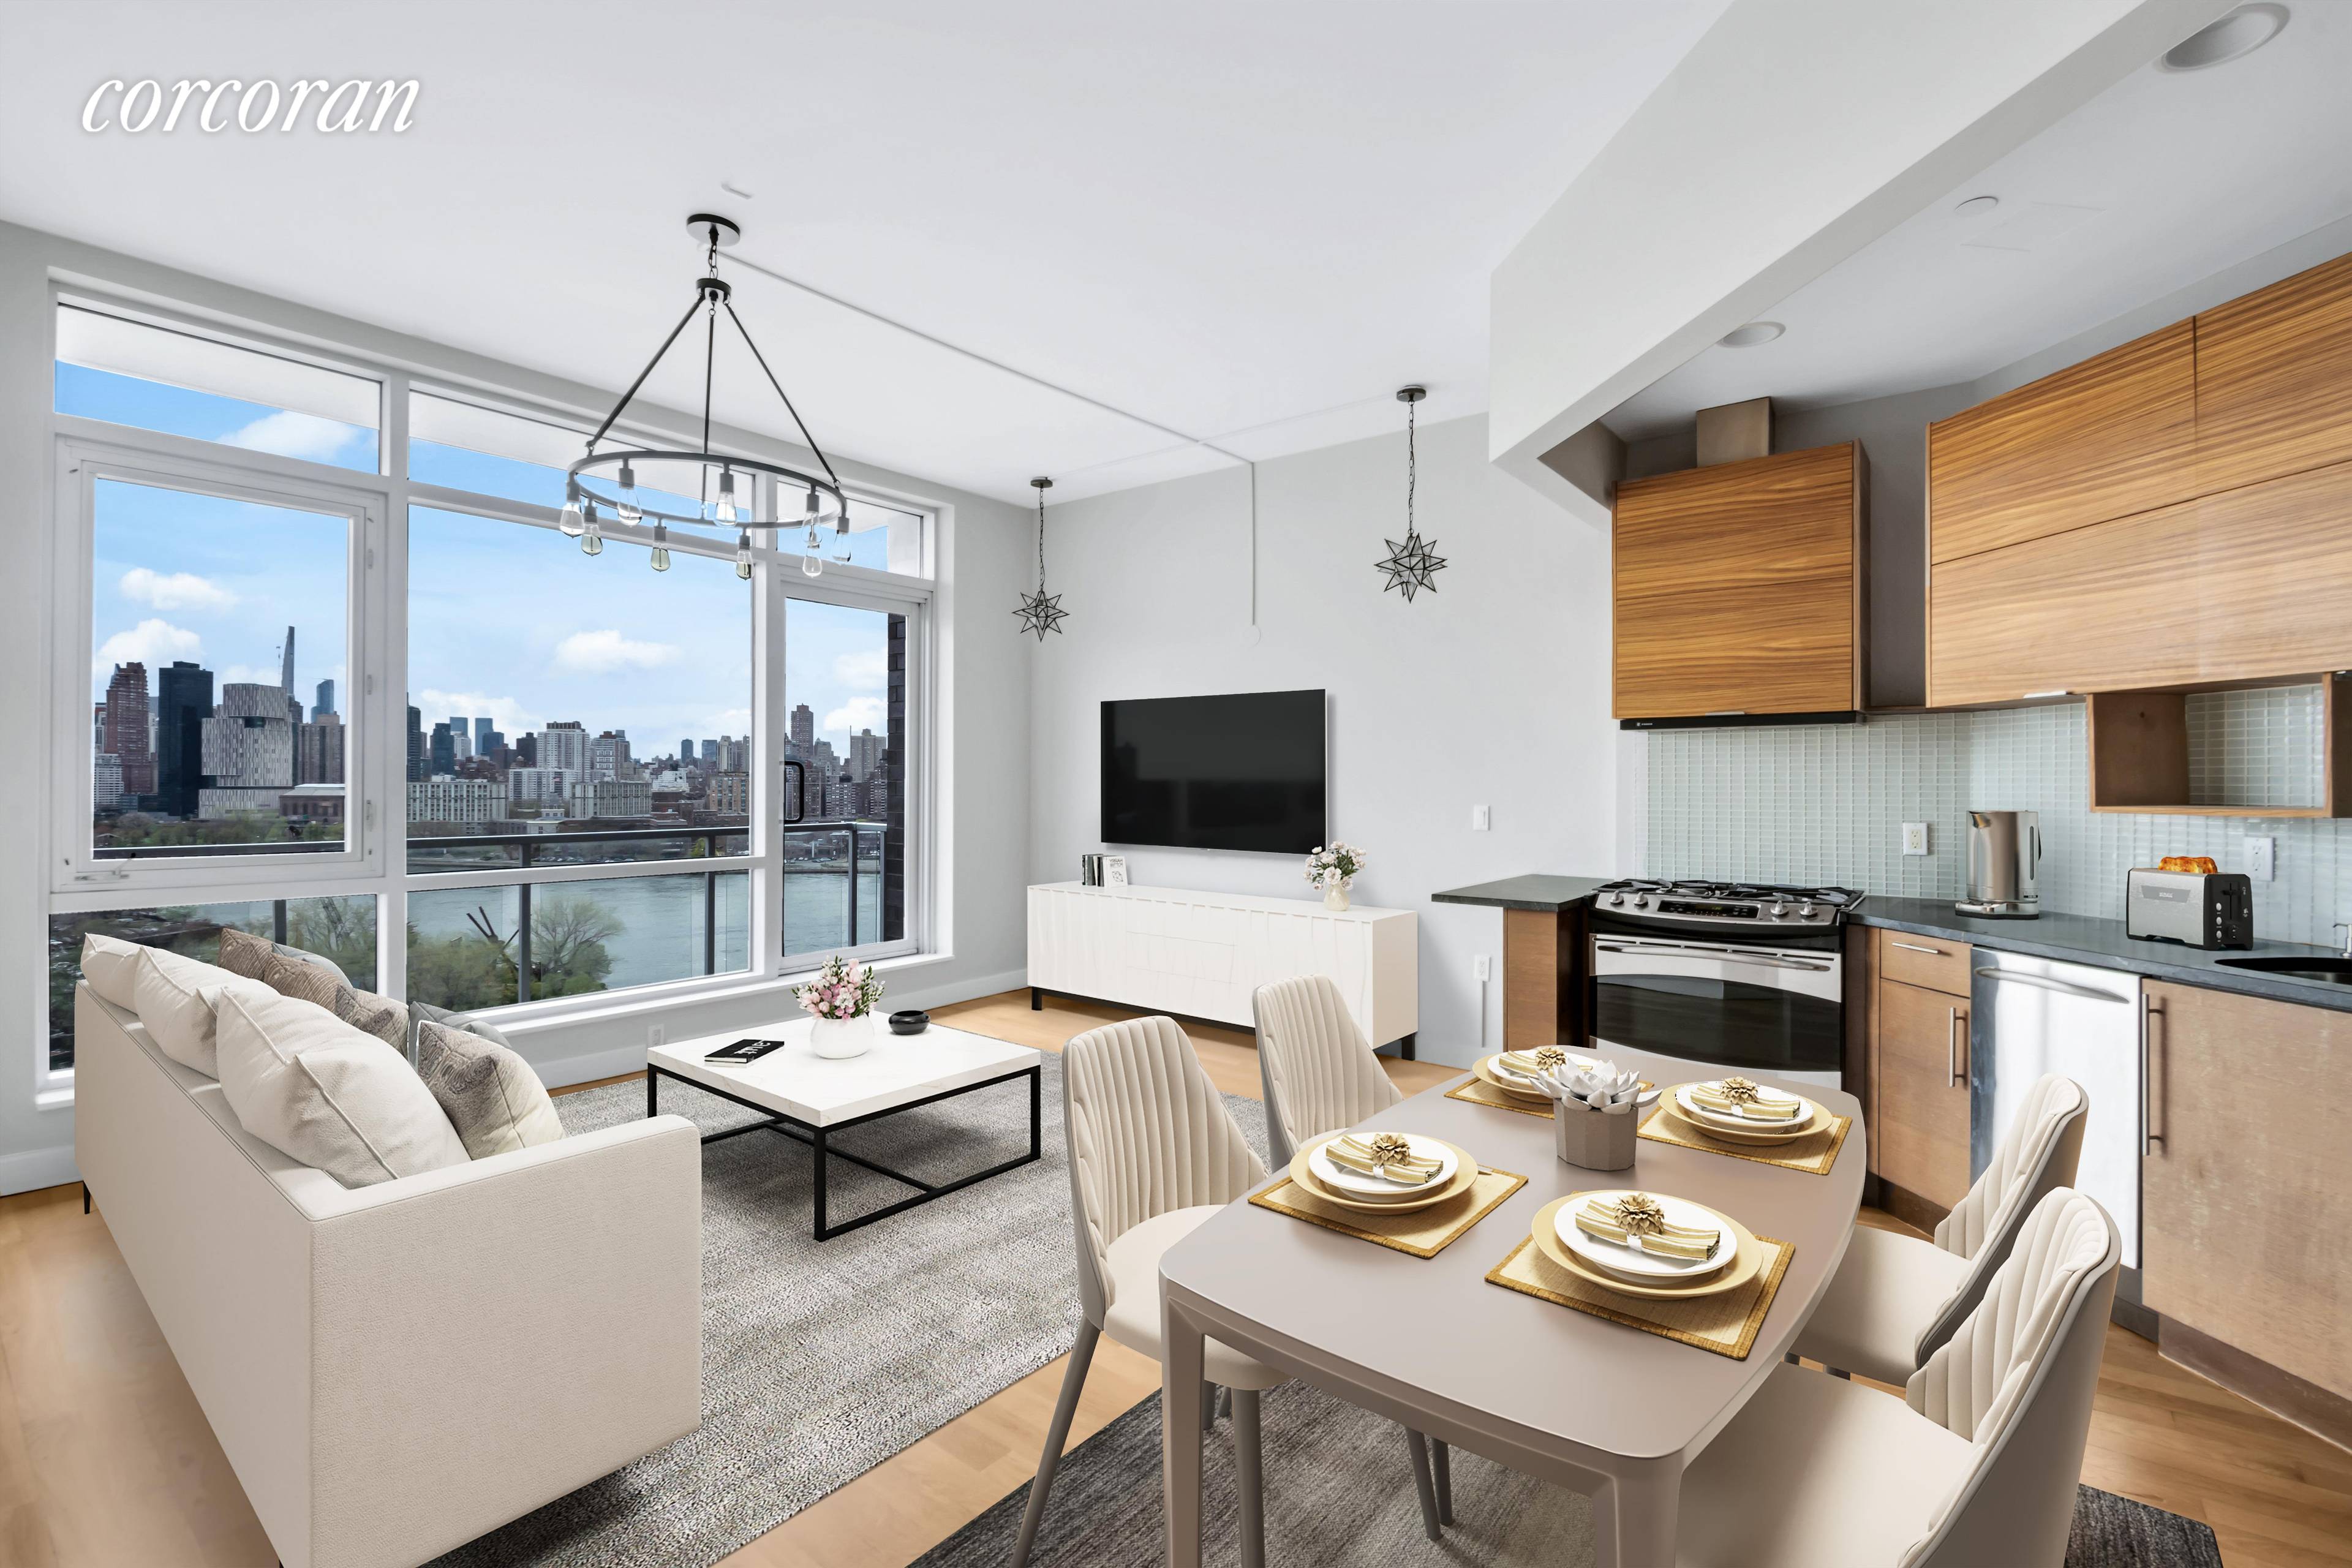 East River Tower offers beautifully designed new luxury condos with breathtaking East River views from every unit.